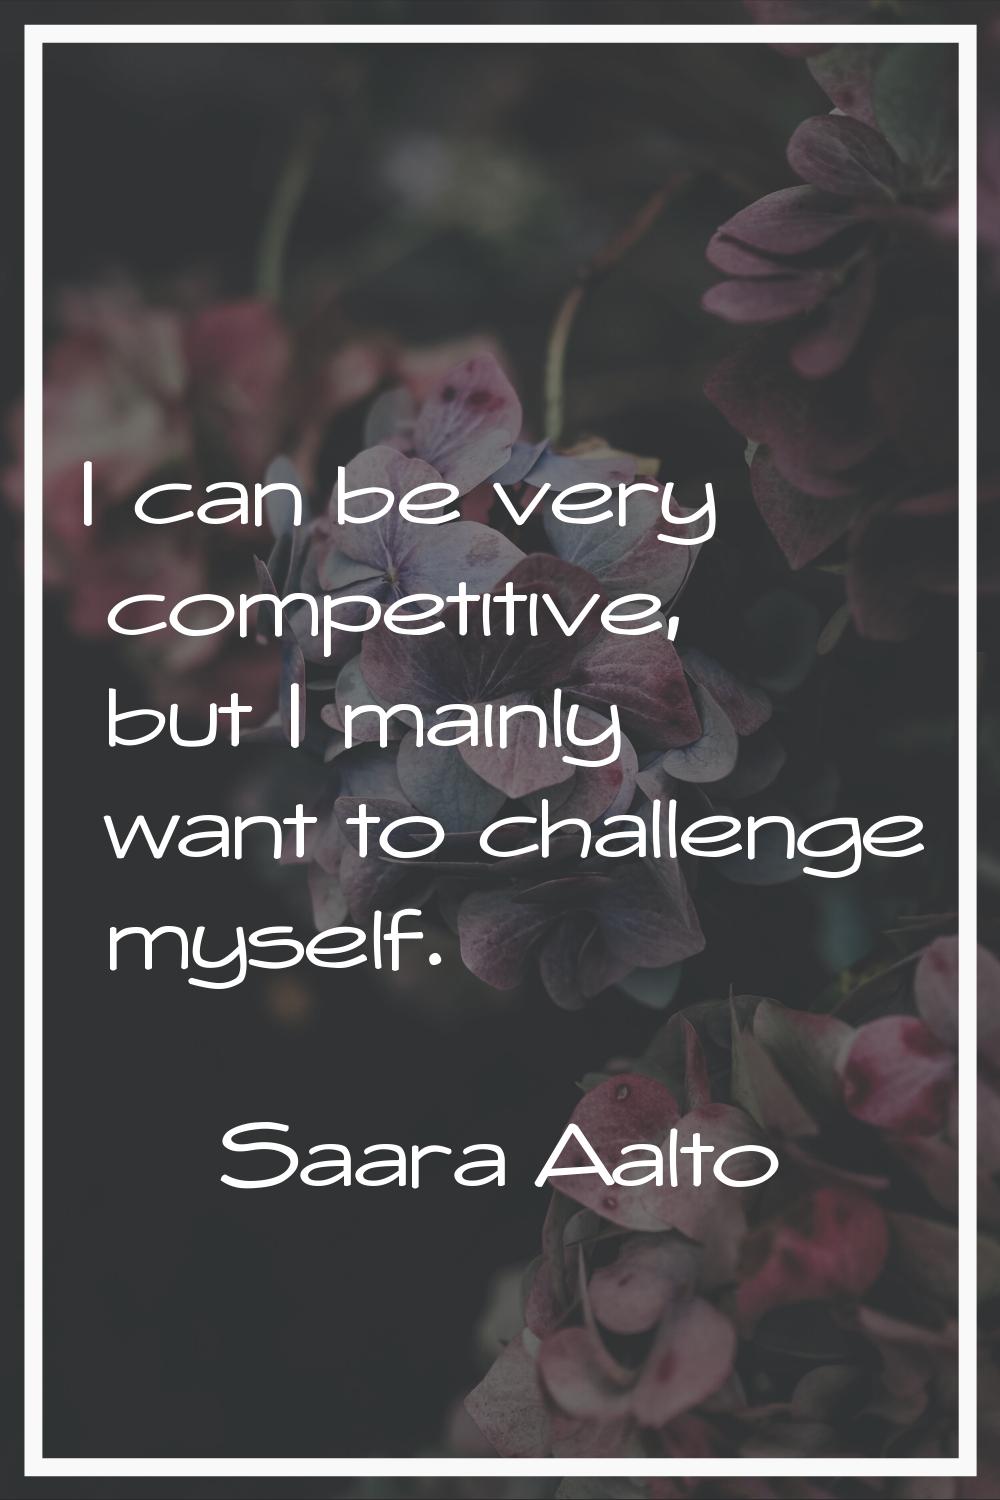 I can be very competitive, but I mainly want to challenge myself.